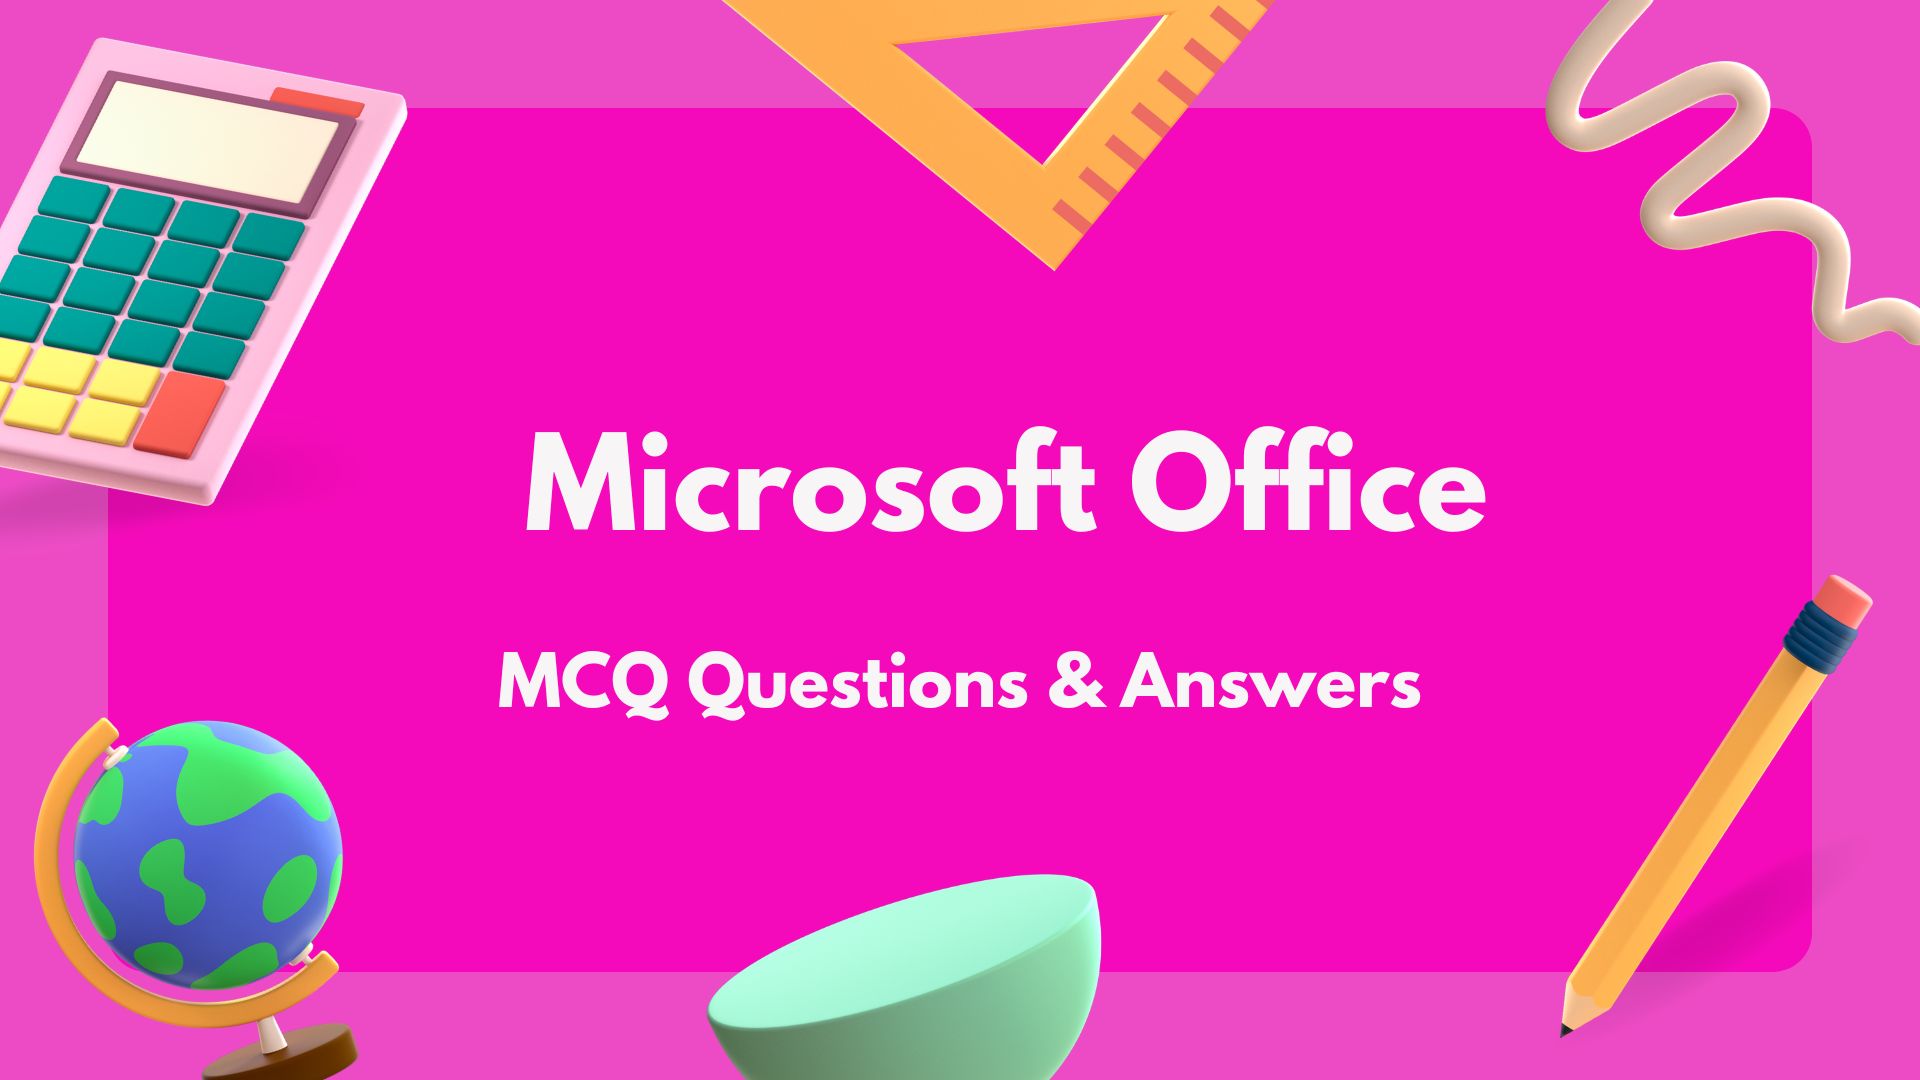 Microsoft Office MCQ Questions & Answers